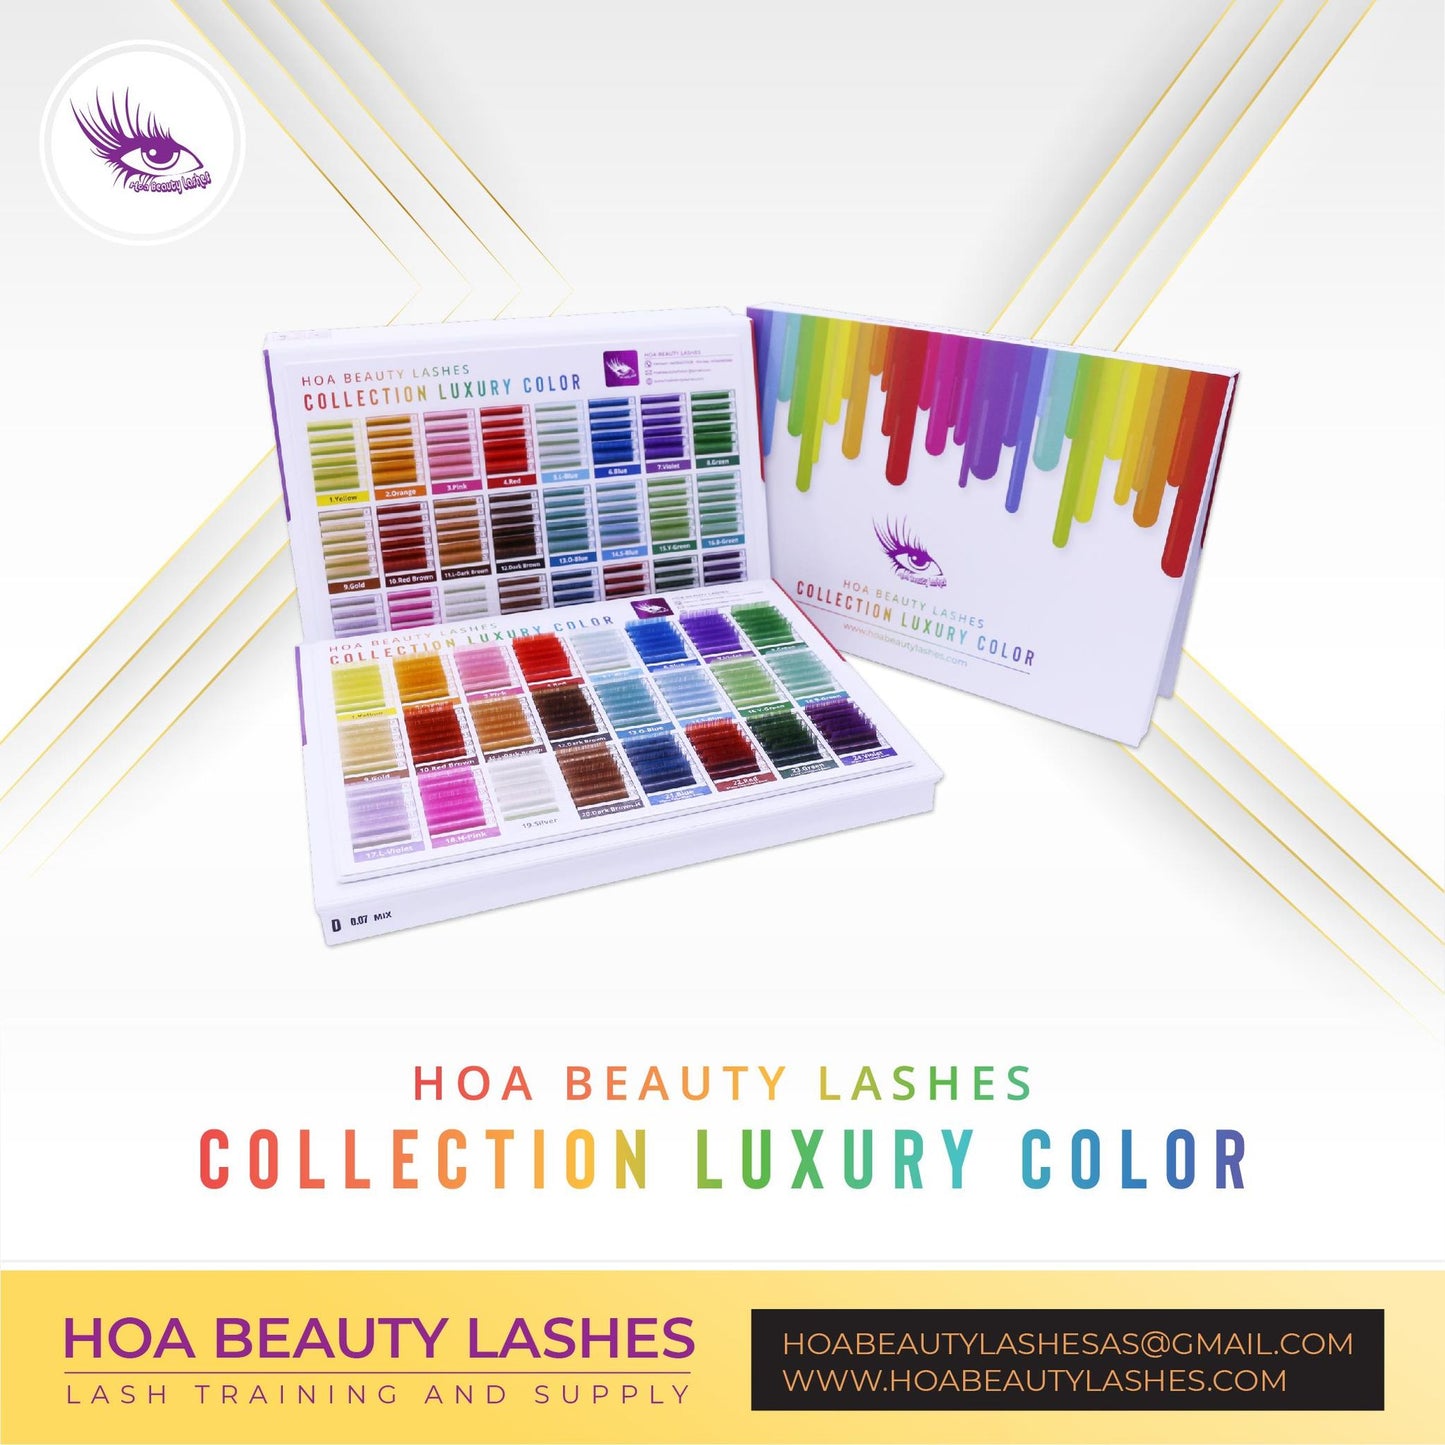 Hoabeautylashes - Collection Luxury Color